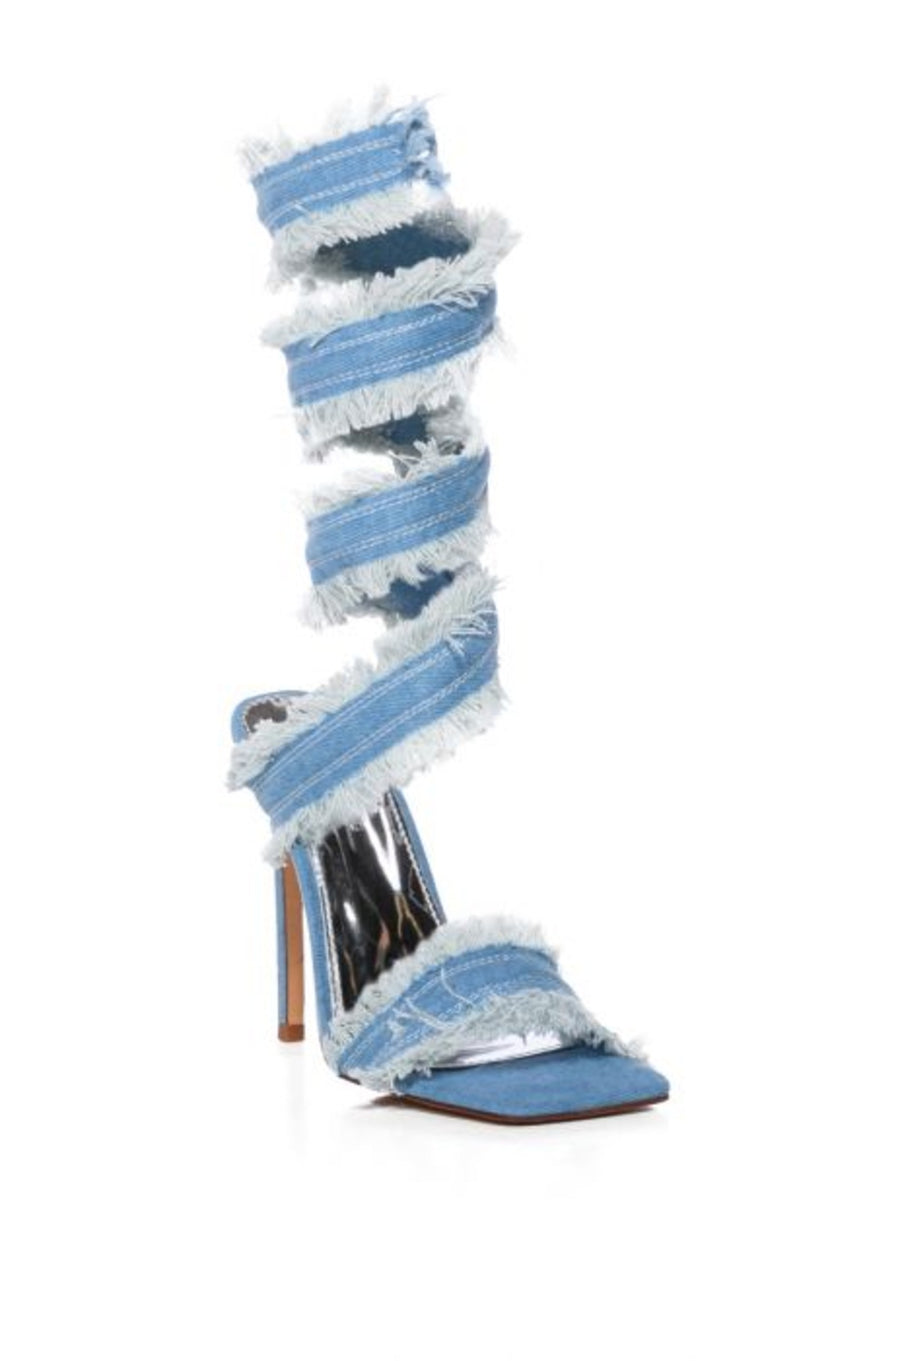 denim open toe stiletto heels with a distressed denim wrap up cord